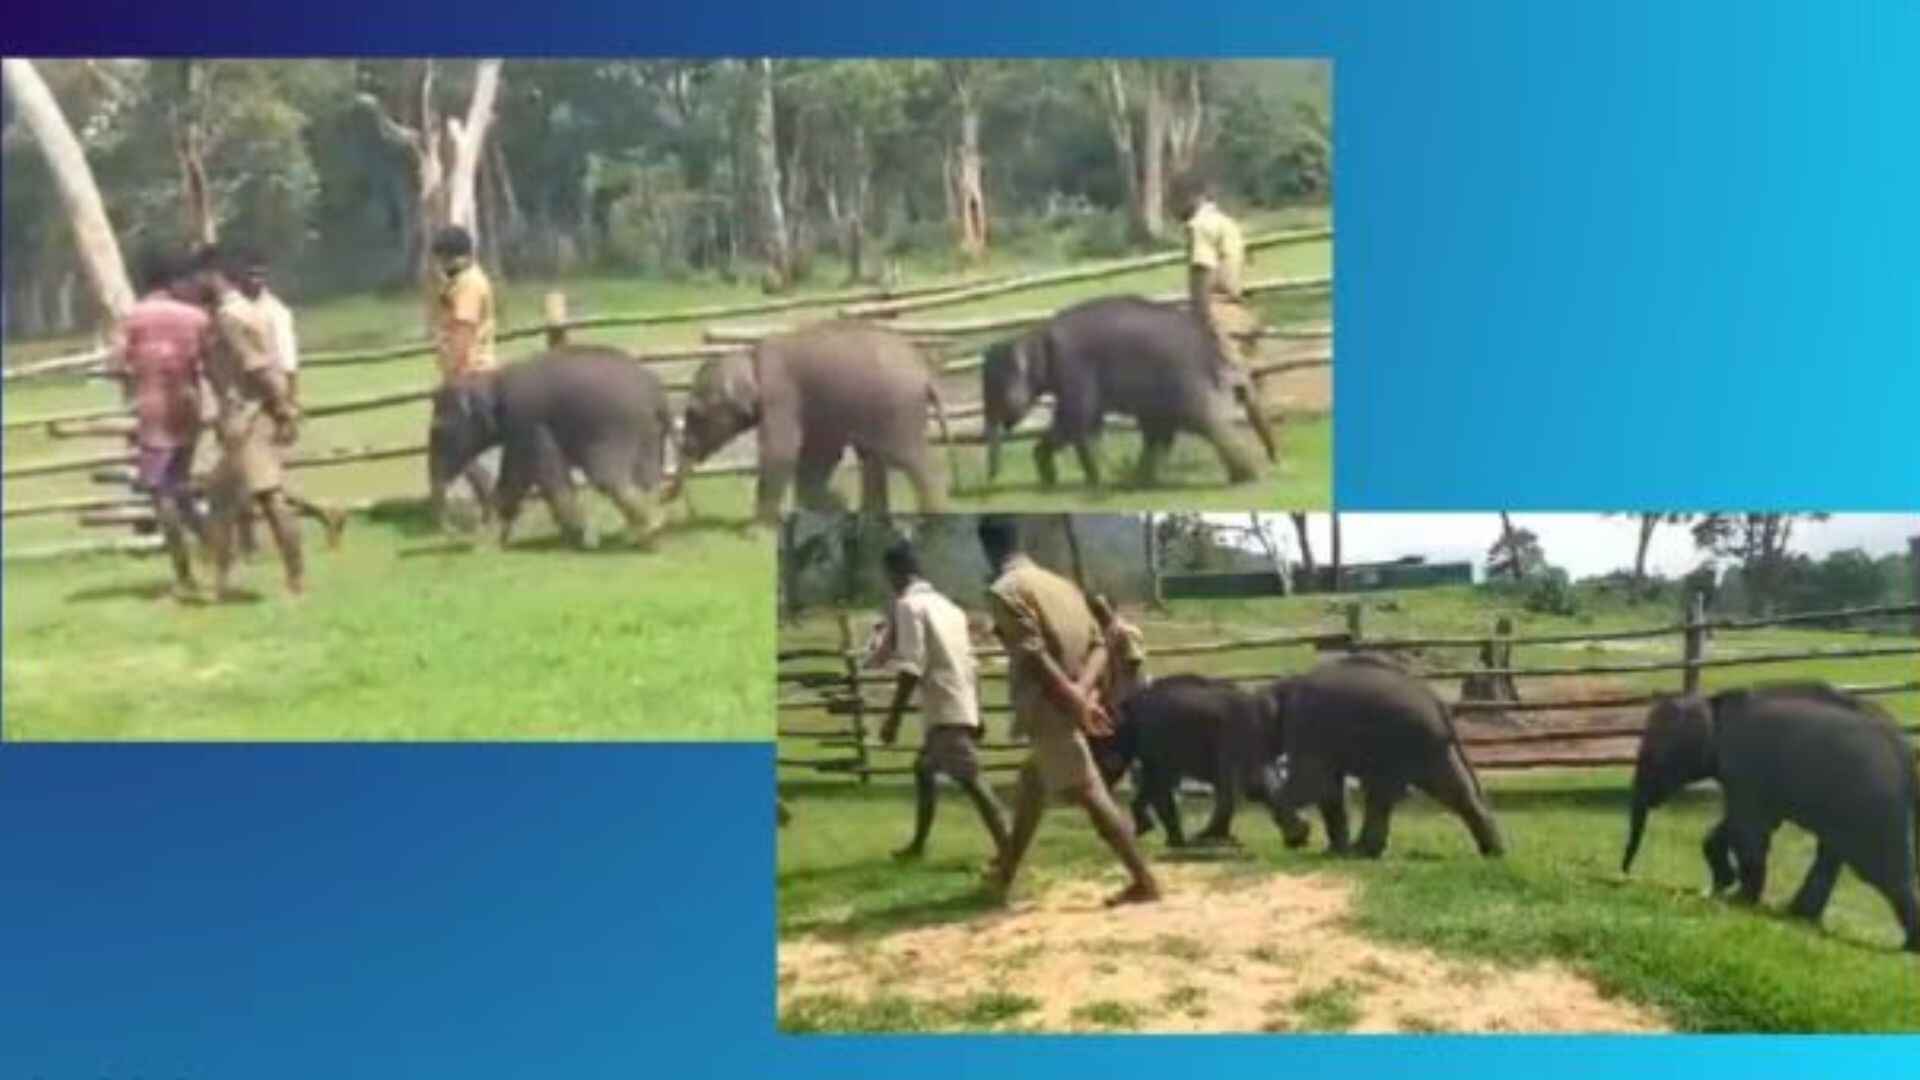 IAS Officer’s Shares Post Of Baby Elephants’ Morning Stroll In Tamil Nadu, Video Goes Viral